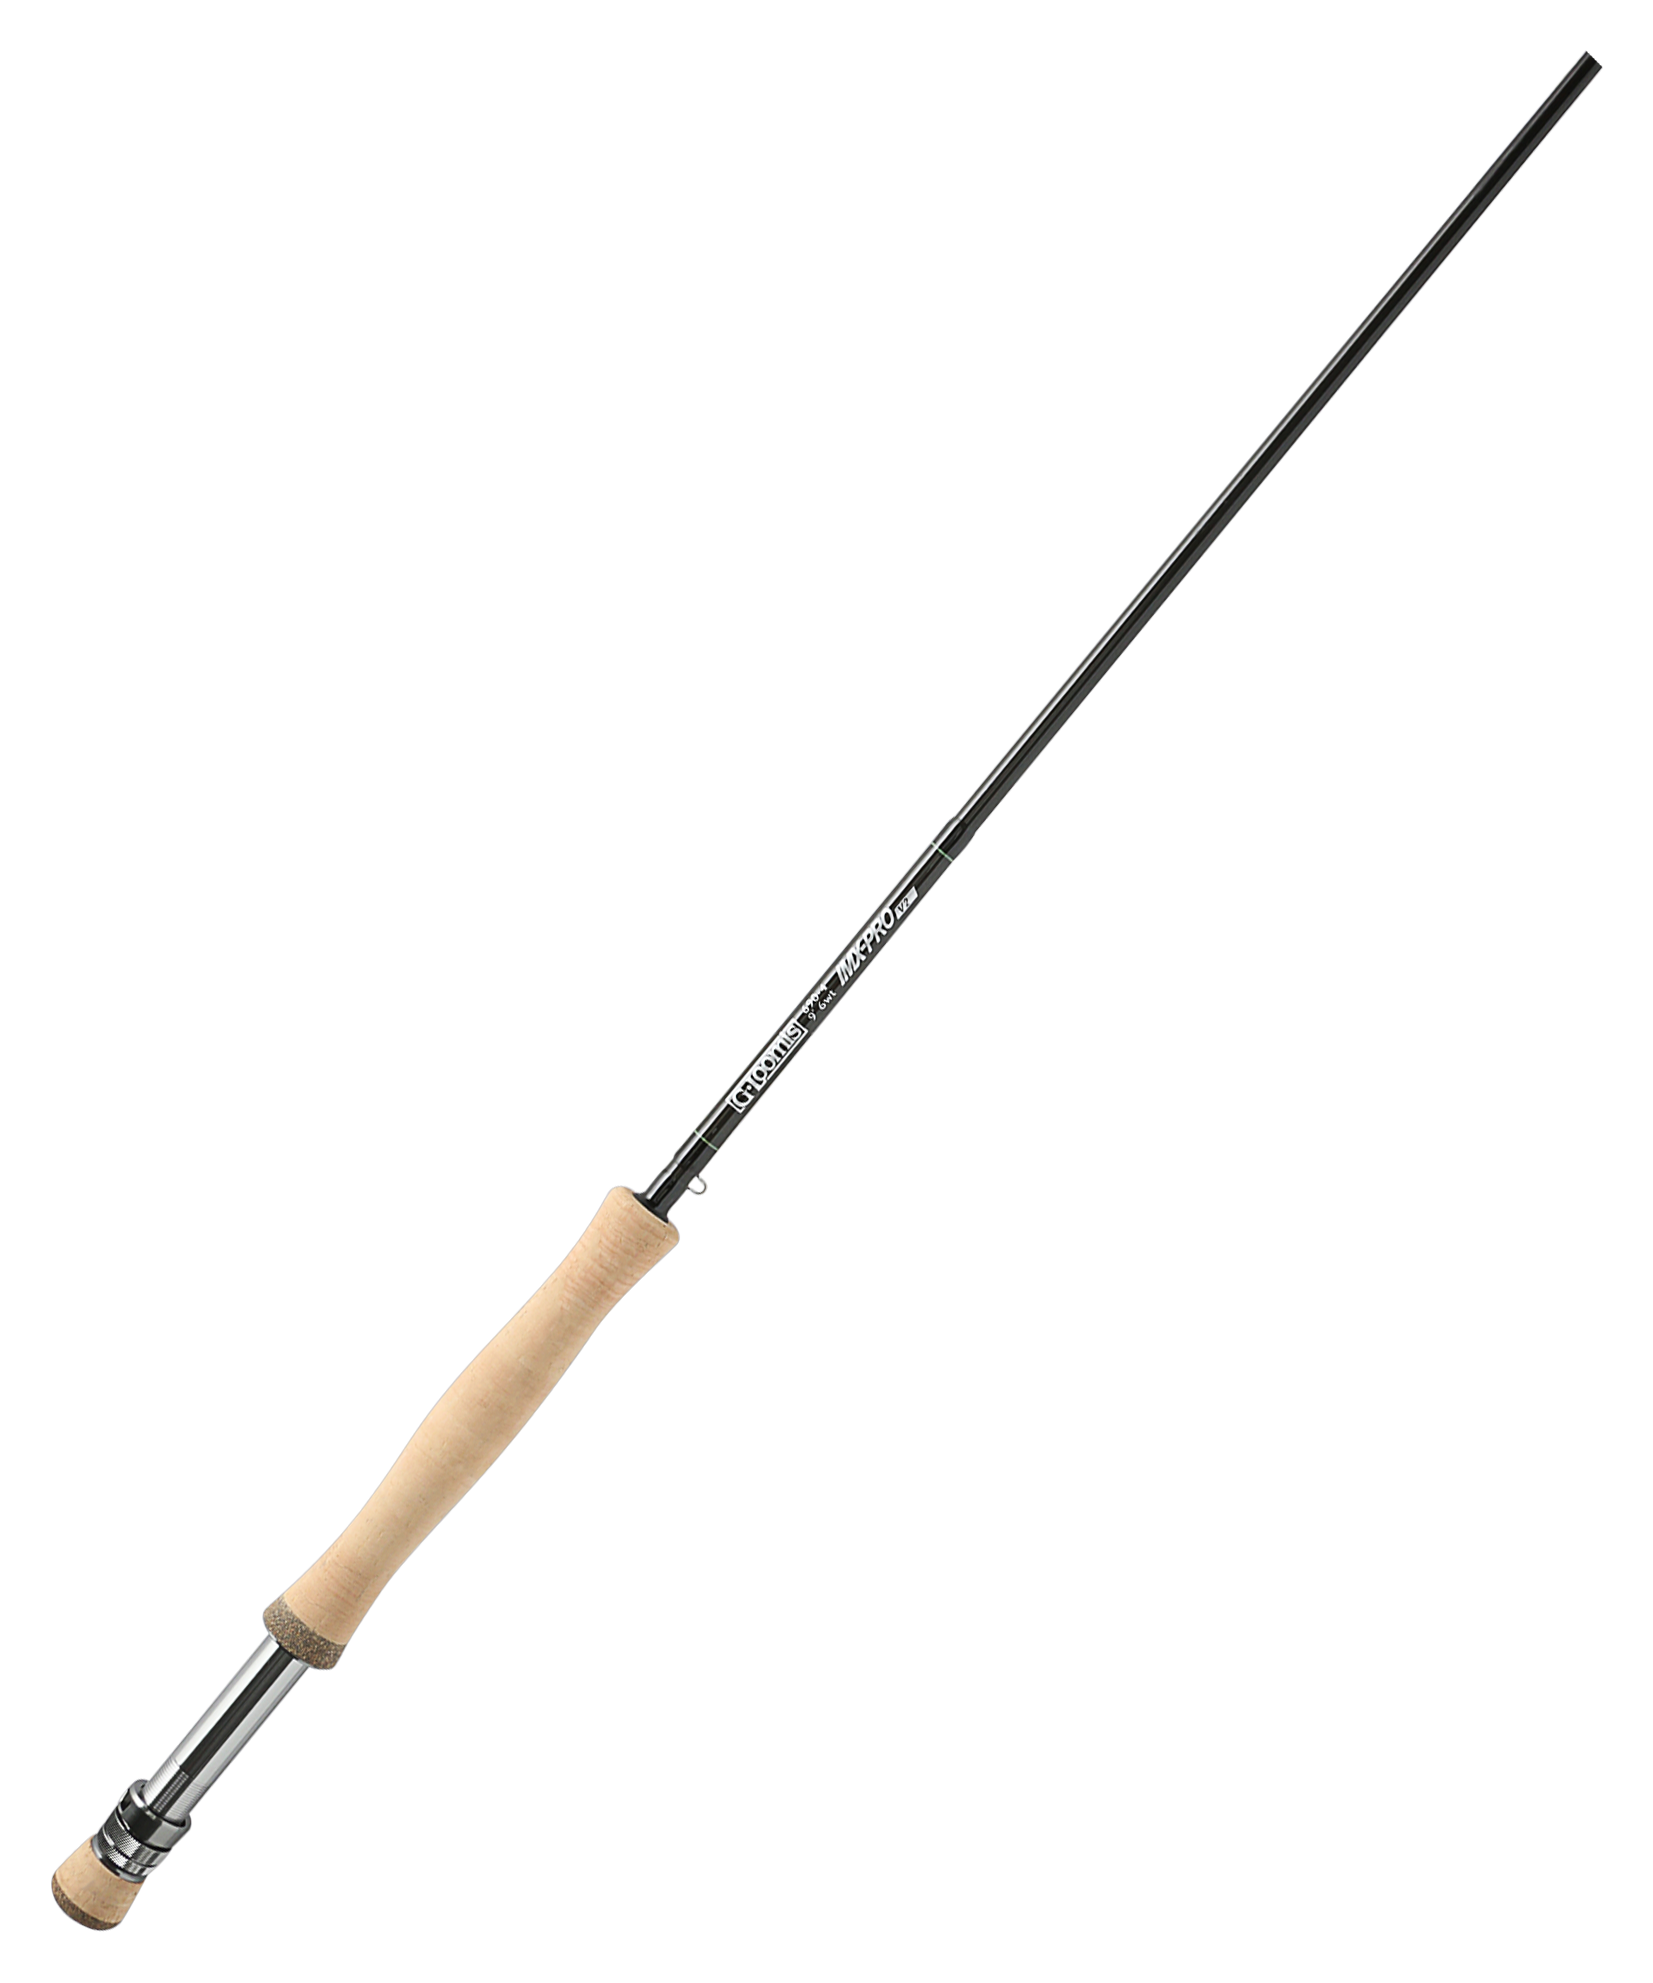 G.Loomis IMX-PRO V2 Fly Rod - Line Weight 6